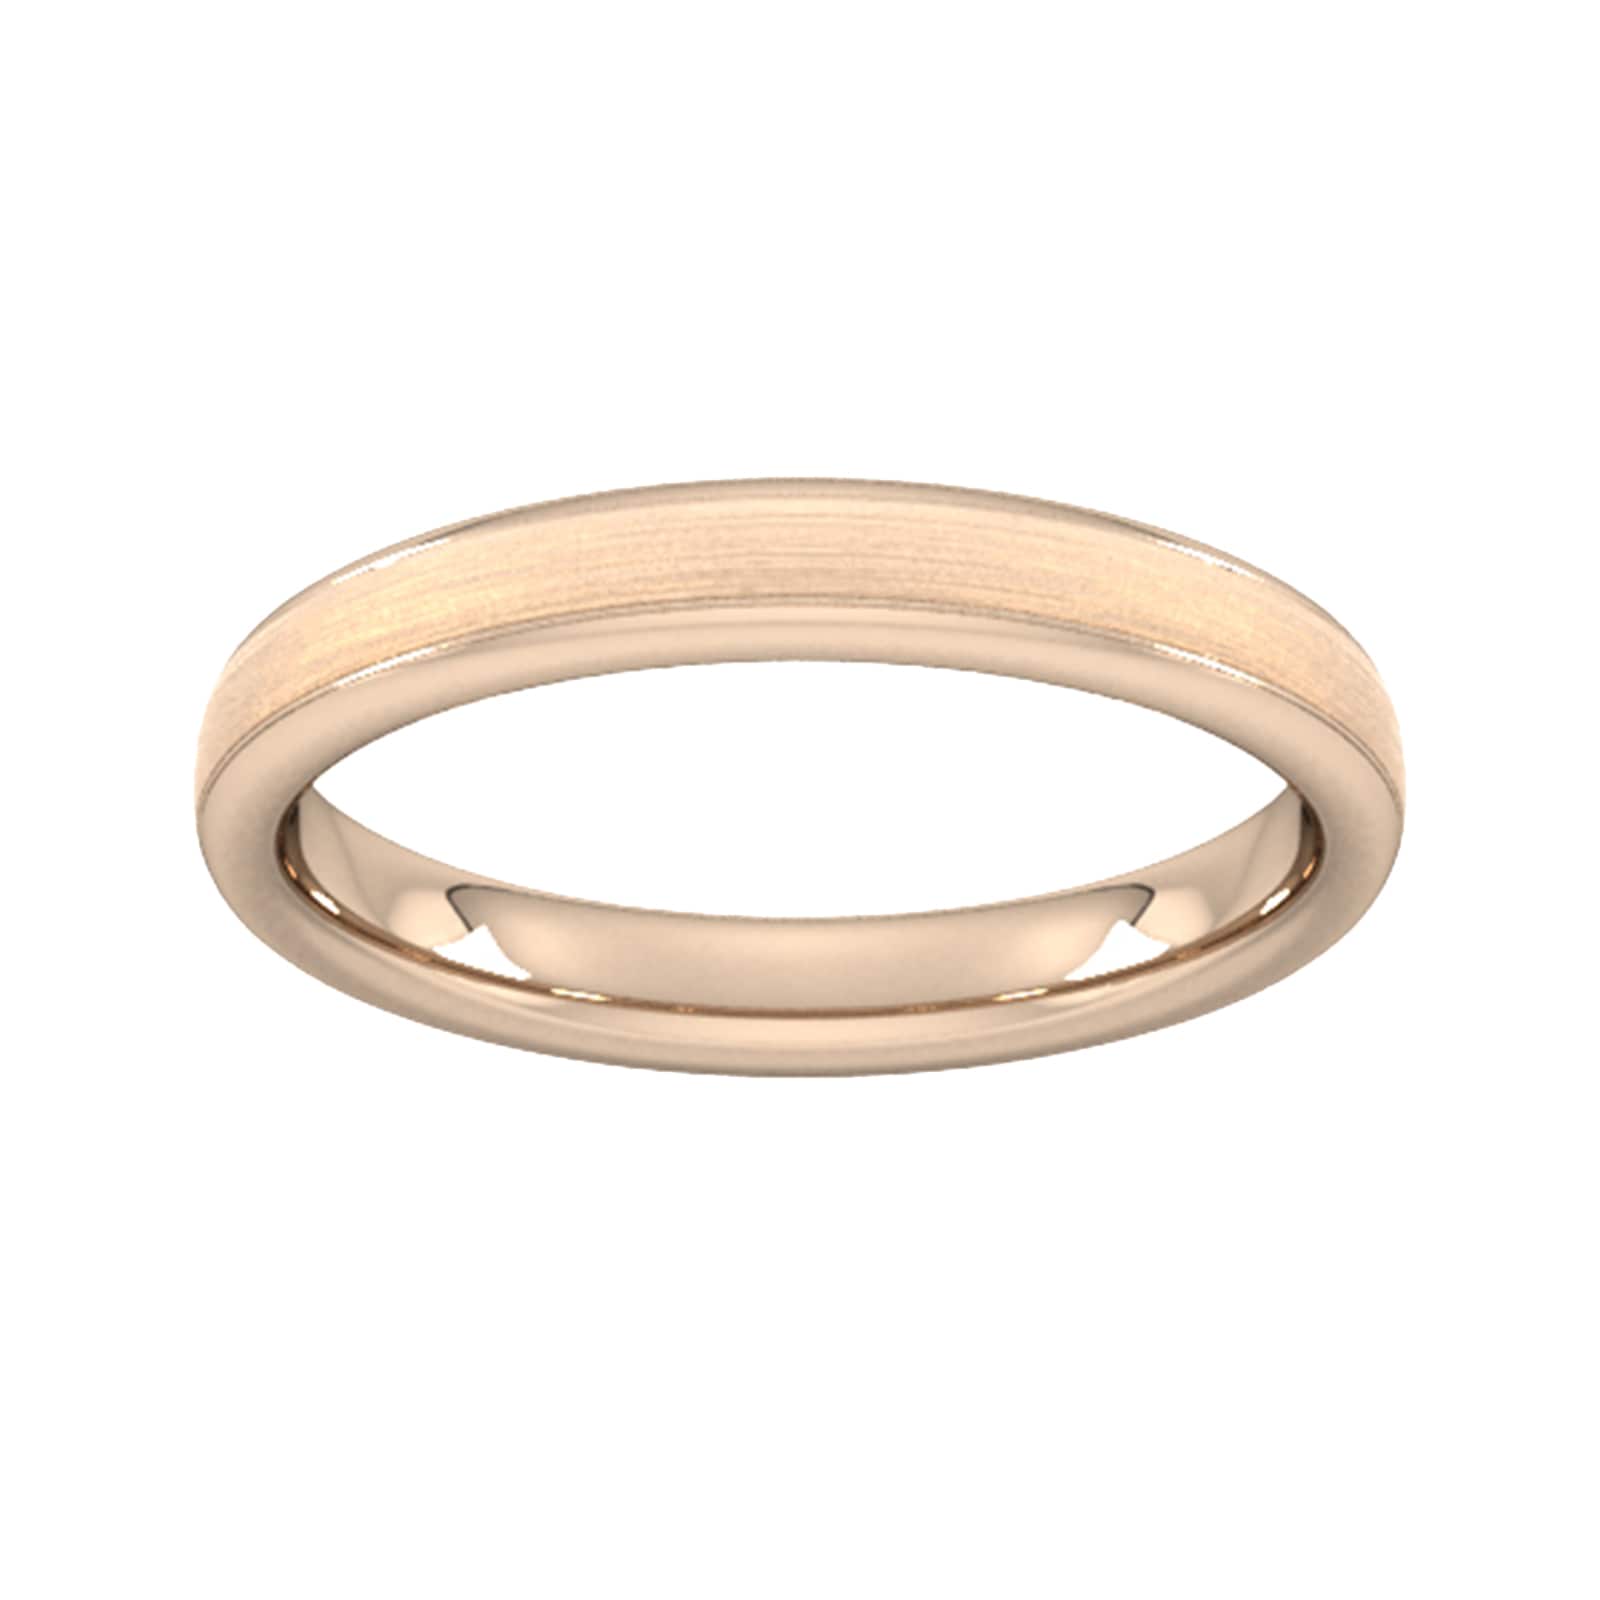 3mm Flat Court Heavy Matt Centre With Grooves Wedding Ring In 9 Carat Rose Gold - Ring Size P